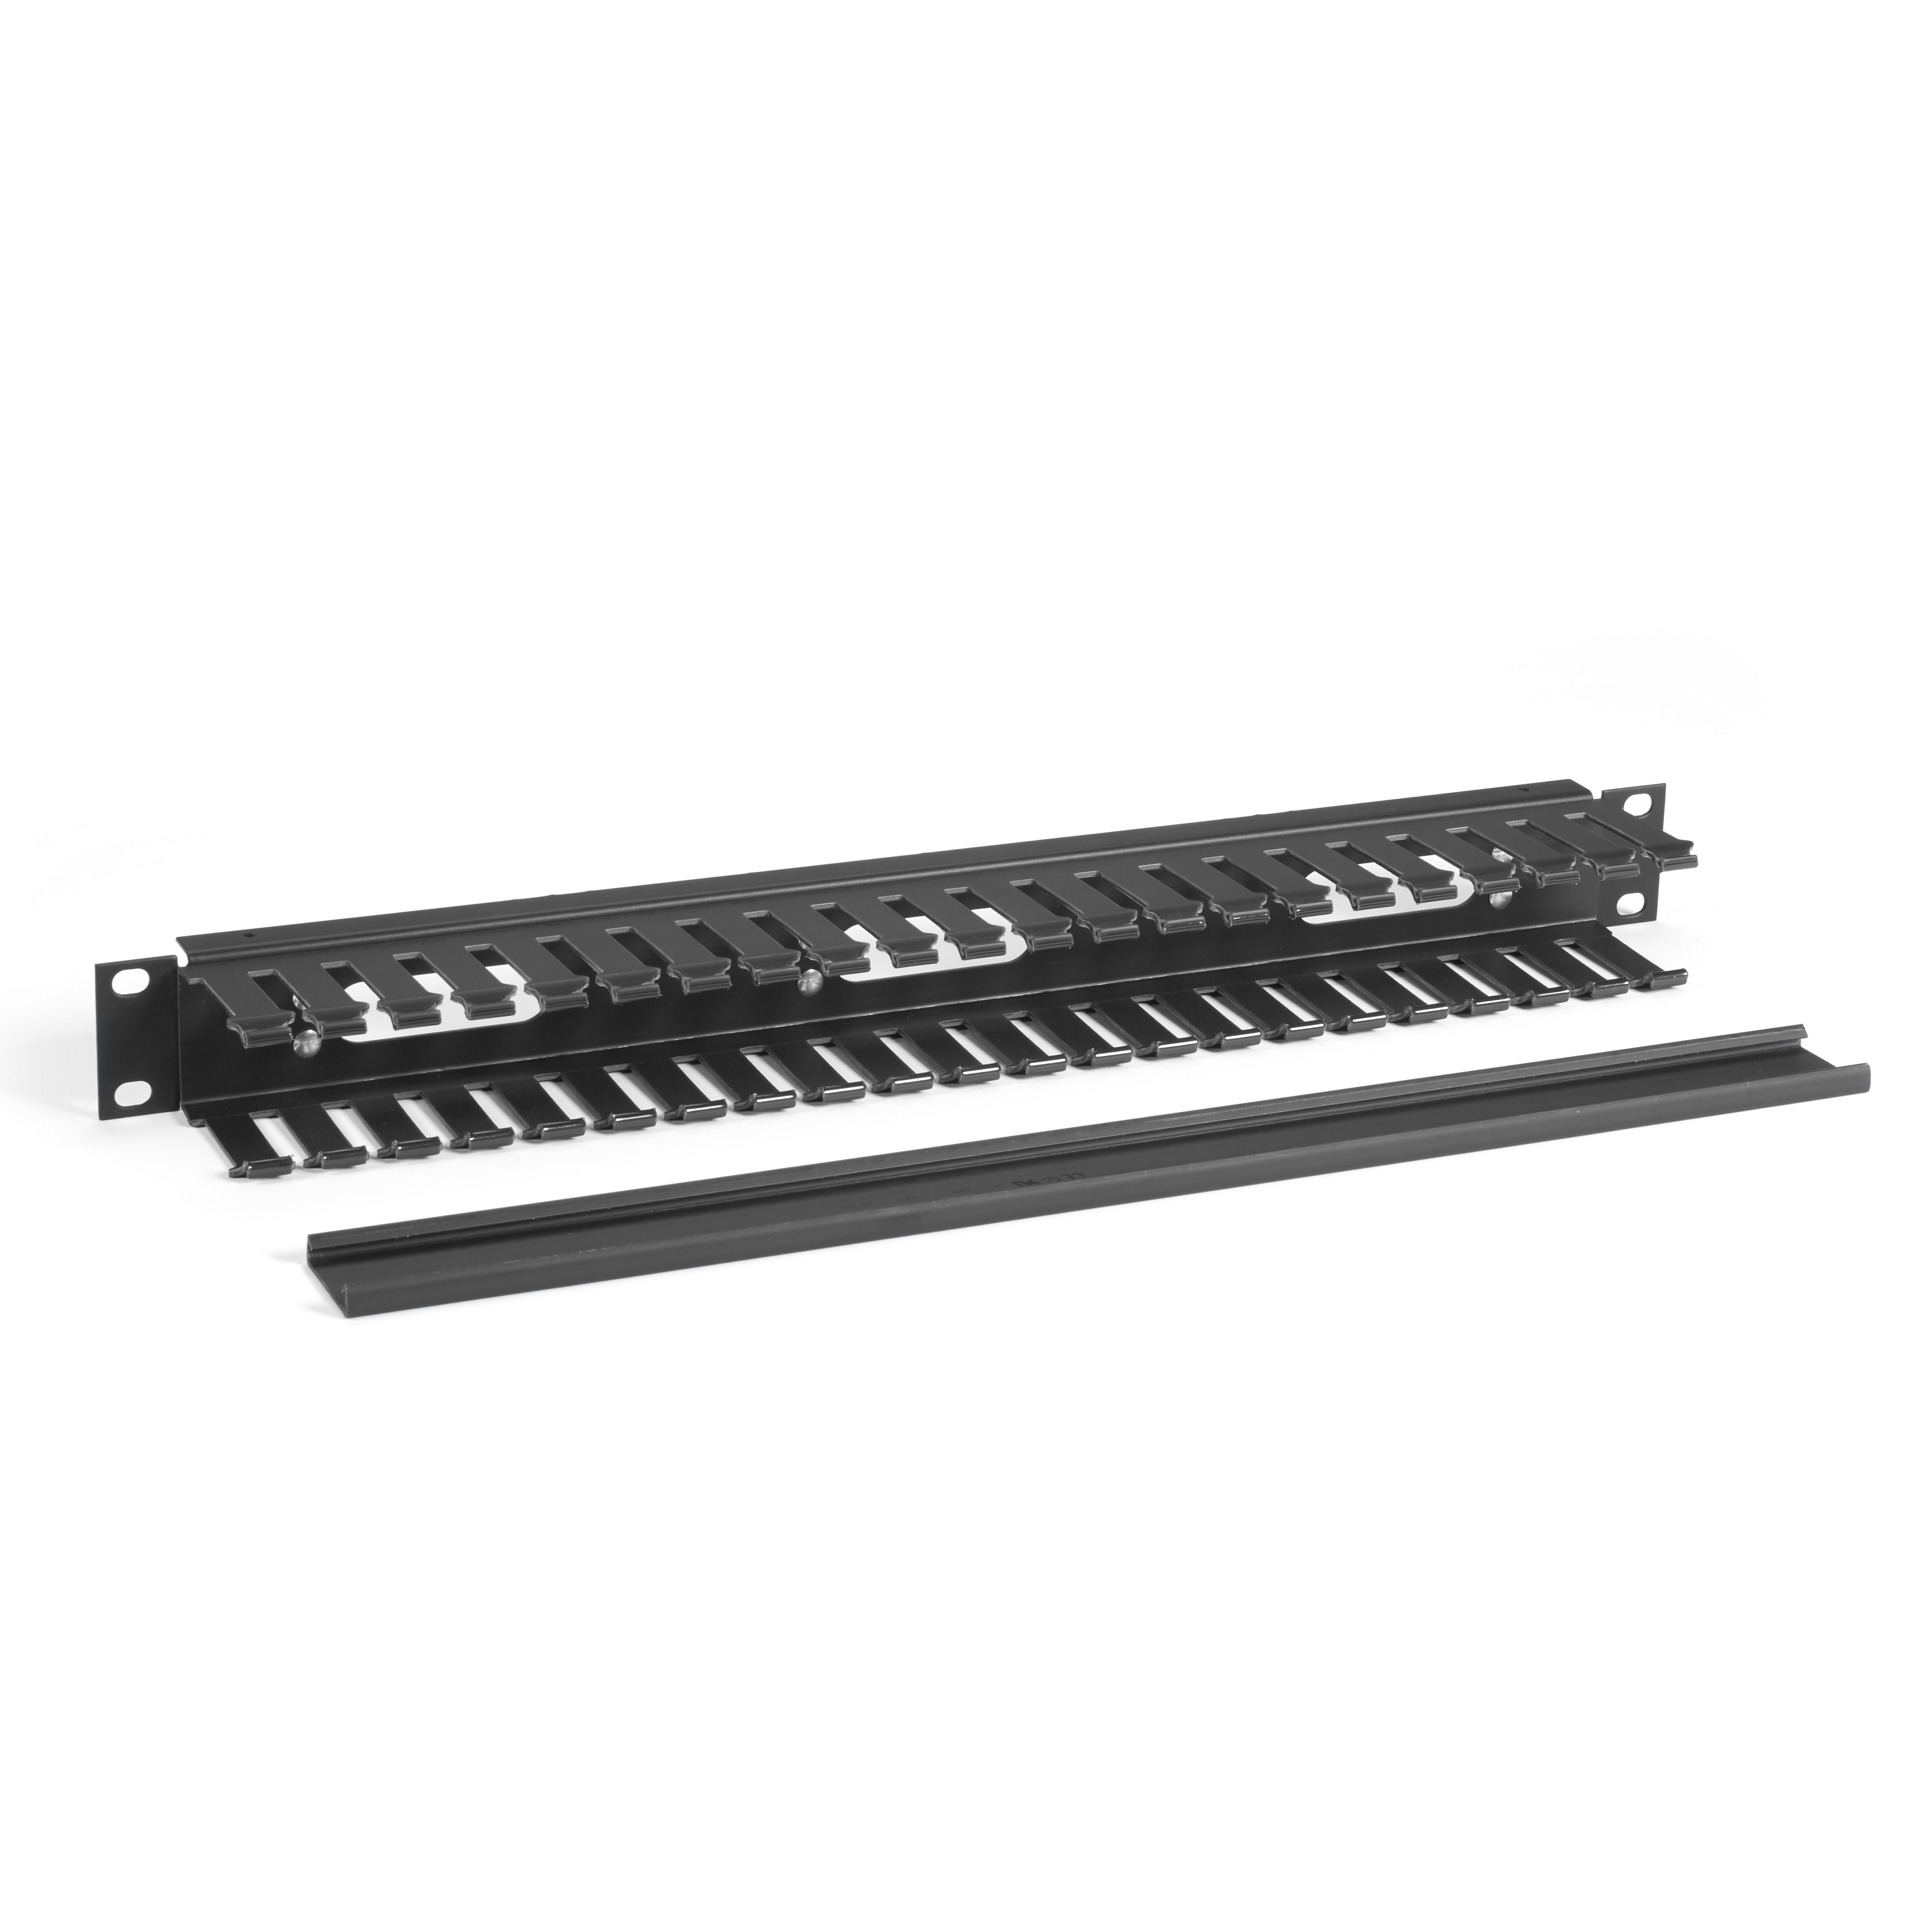 BlackBox RMT203A-R4 Vertical Cable Manager, Double-Sided, Black